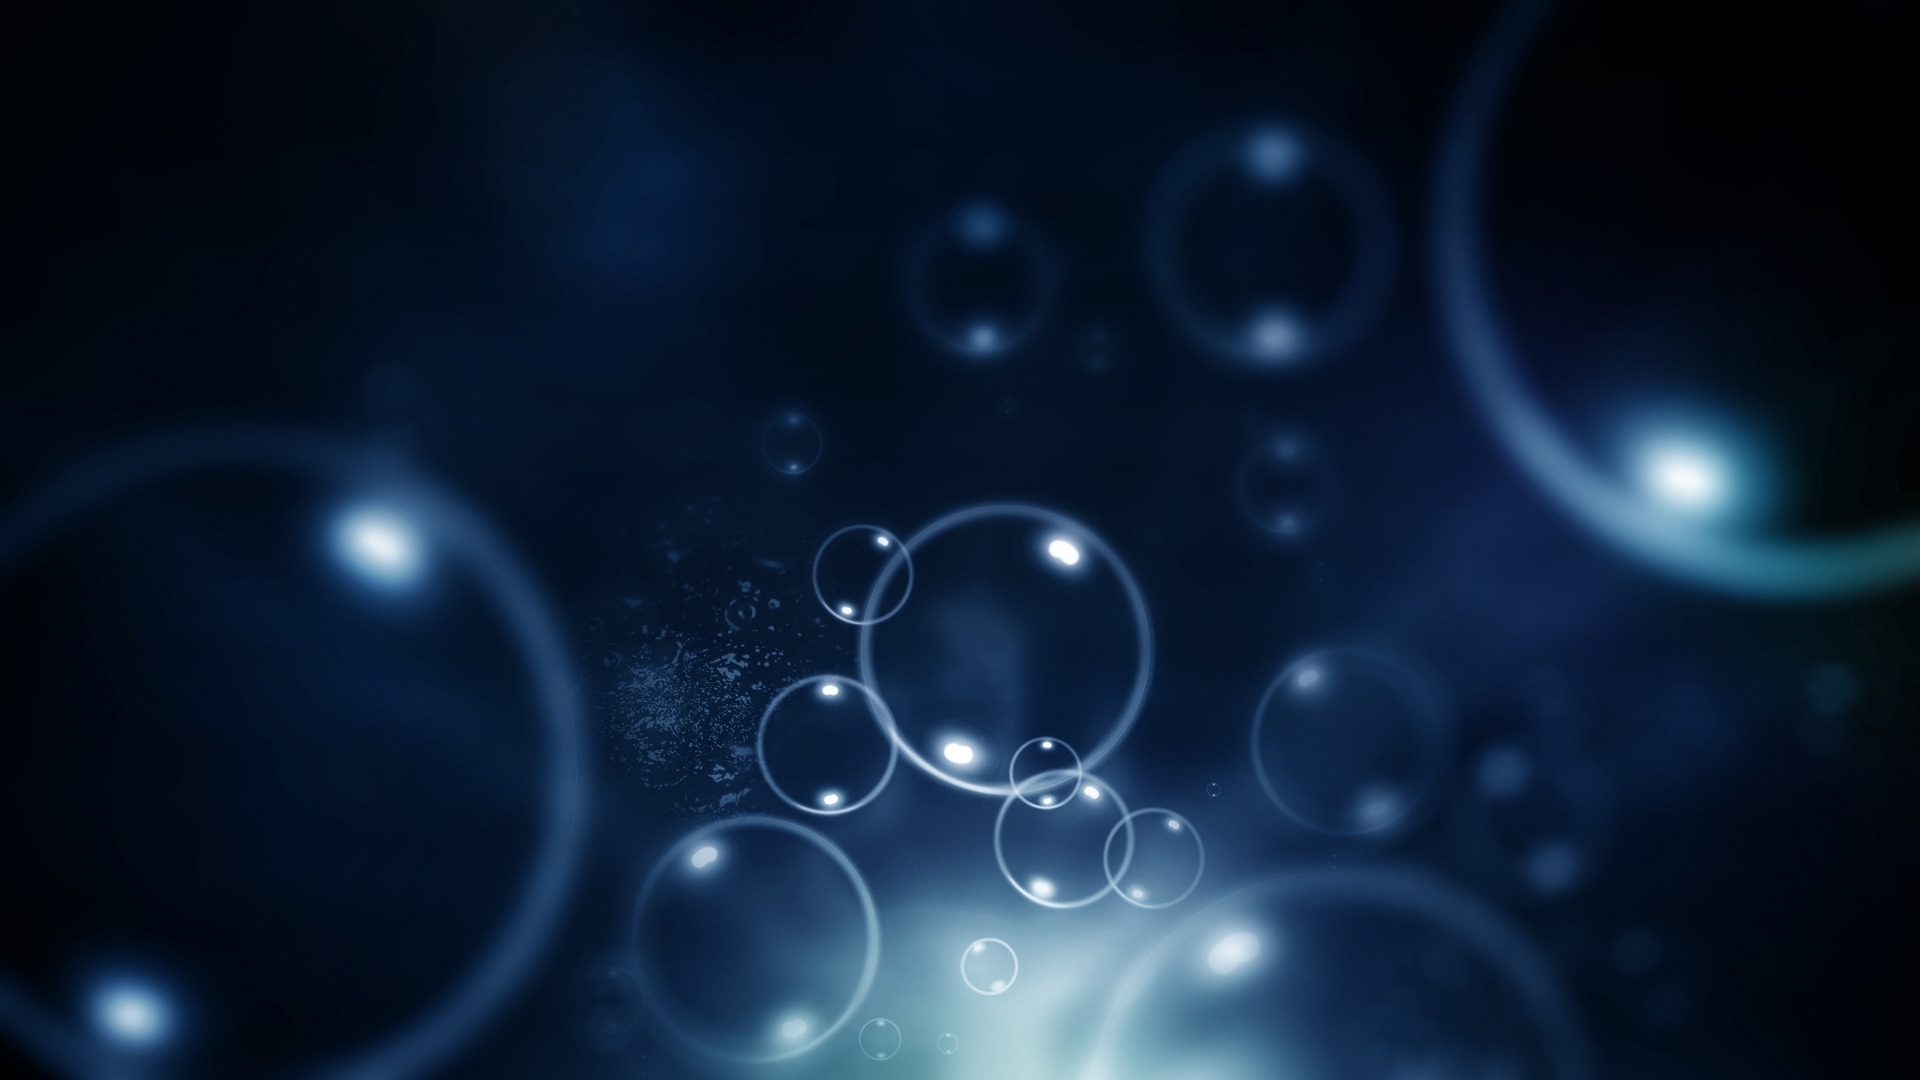 Water Bubbles for 1920 x 1080 HDTV 1080p resolution